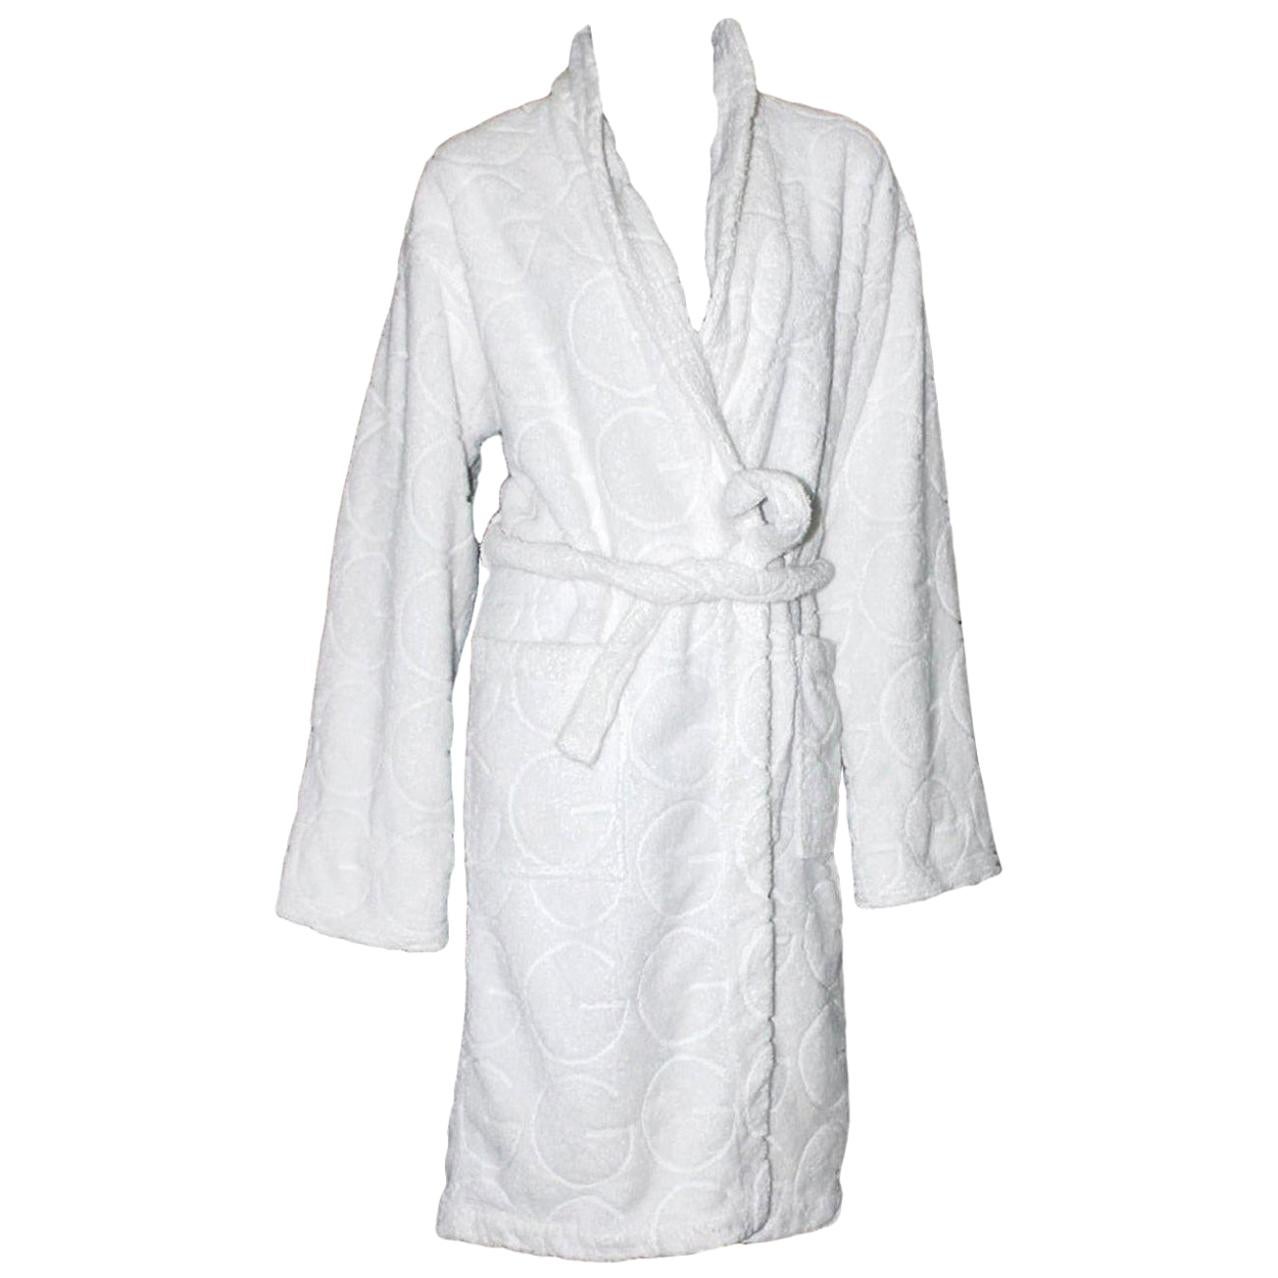 Rare Gucci by Tom Ford White GG Logo Terrycloth Terry Towel Bath Robe Coat 